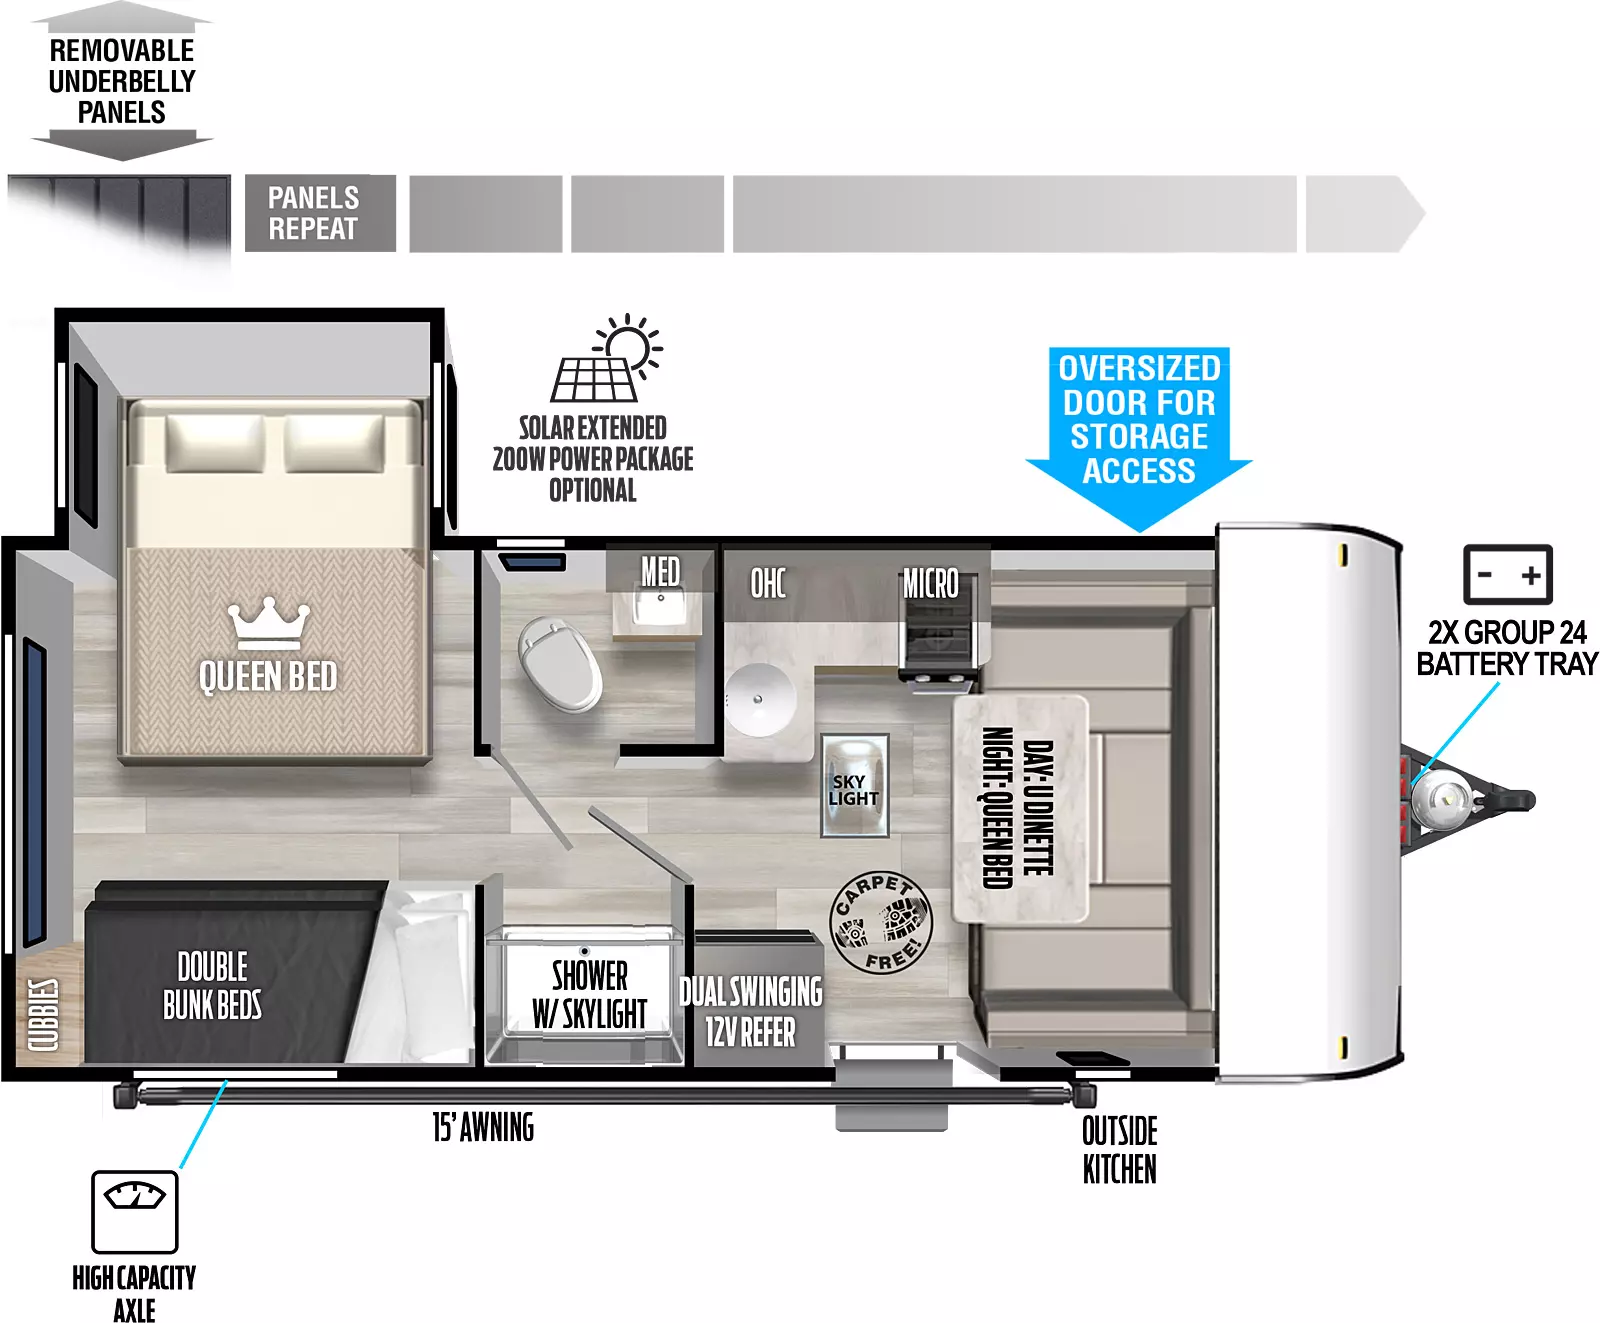 the 176QBHK has one slideout and one entry. Exterior features removeable underbelly panels, optional solar extended 200W power package, storage, high capacity axle, 15 foot awning, outside kitchen, and front 2X group 24 battery tray. Interior layout front to back: carpet-free RV; u-dinette converts to queen bed; kitchen counter with cooktop wraps along inner wall with sink, microwave, and overhead cabinet; door side entry, dual swinging 12V refrigerator, and skylight; pass-through full bathroom with toilet, sink and medicine cabinet on off-door side, and shower with skylight on door side; rear off-door side queen bed slideout; rear door side double bunk beds with cubbies.